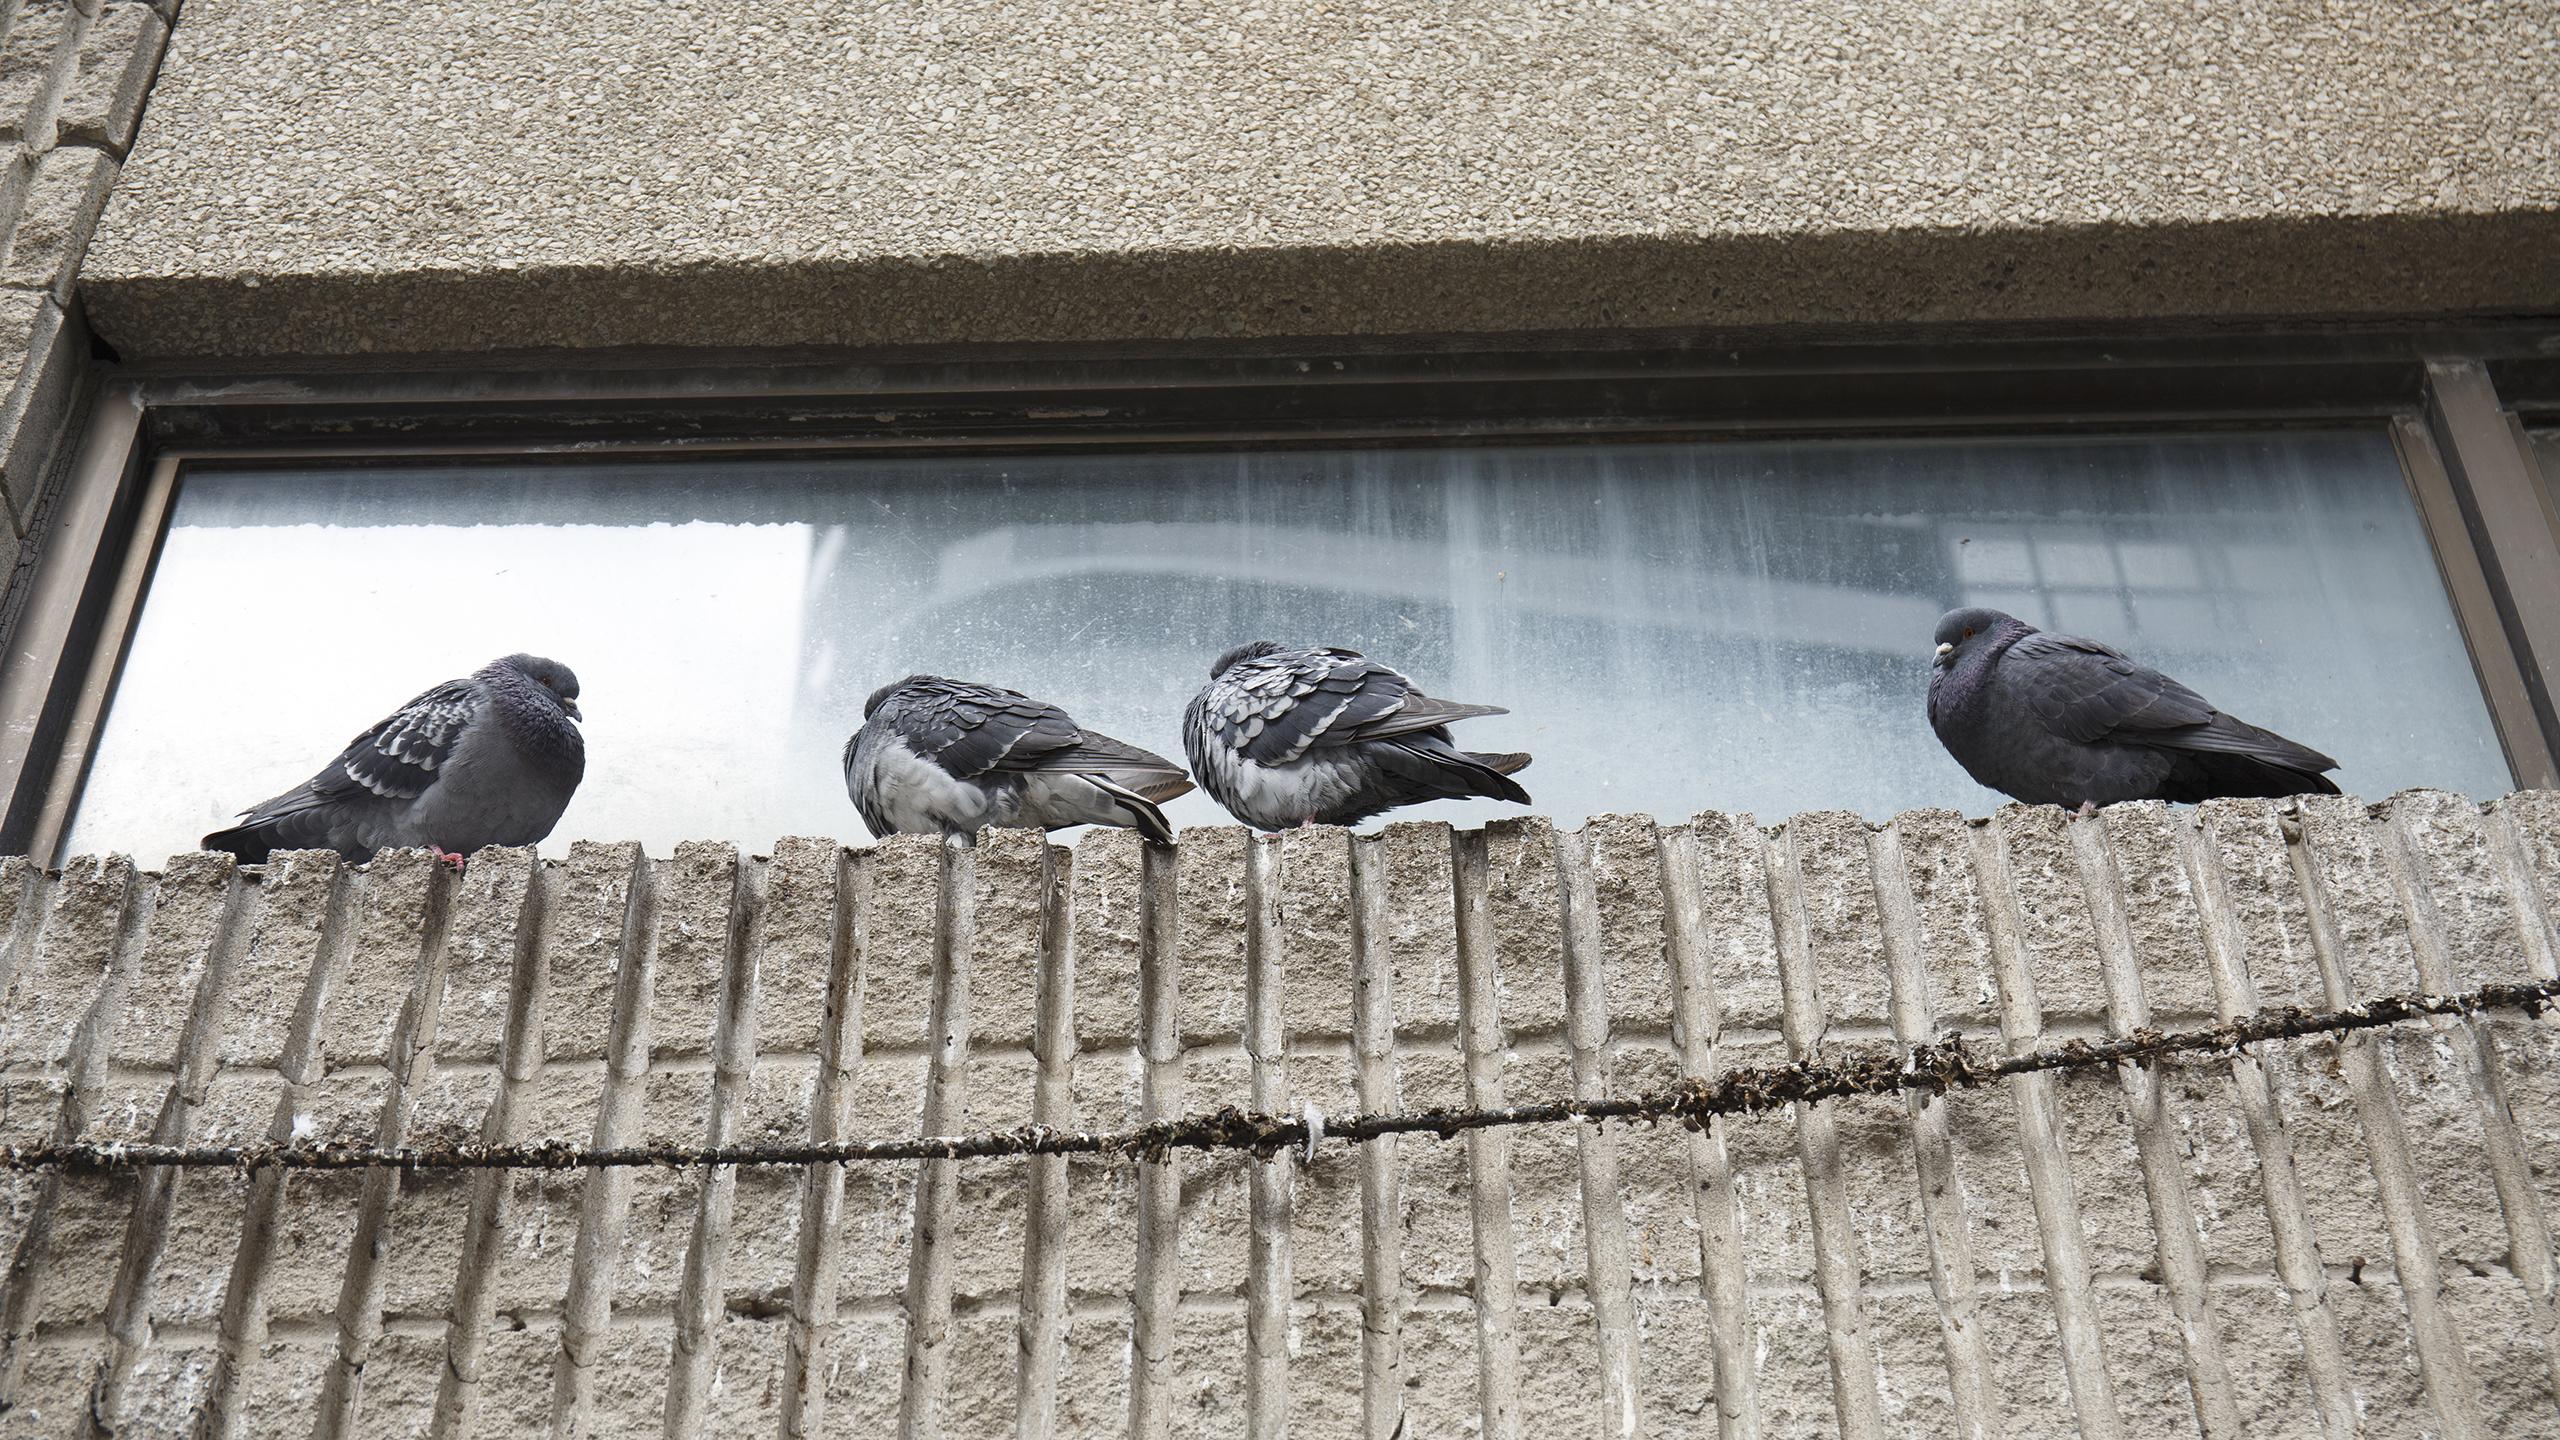 aesthic shot of pigeons on campus